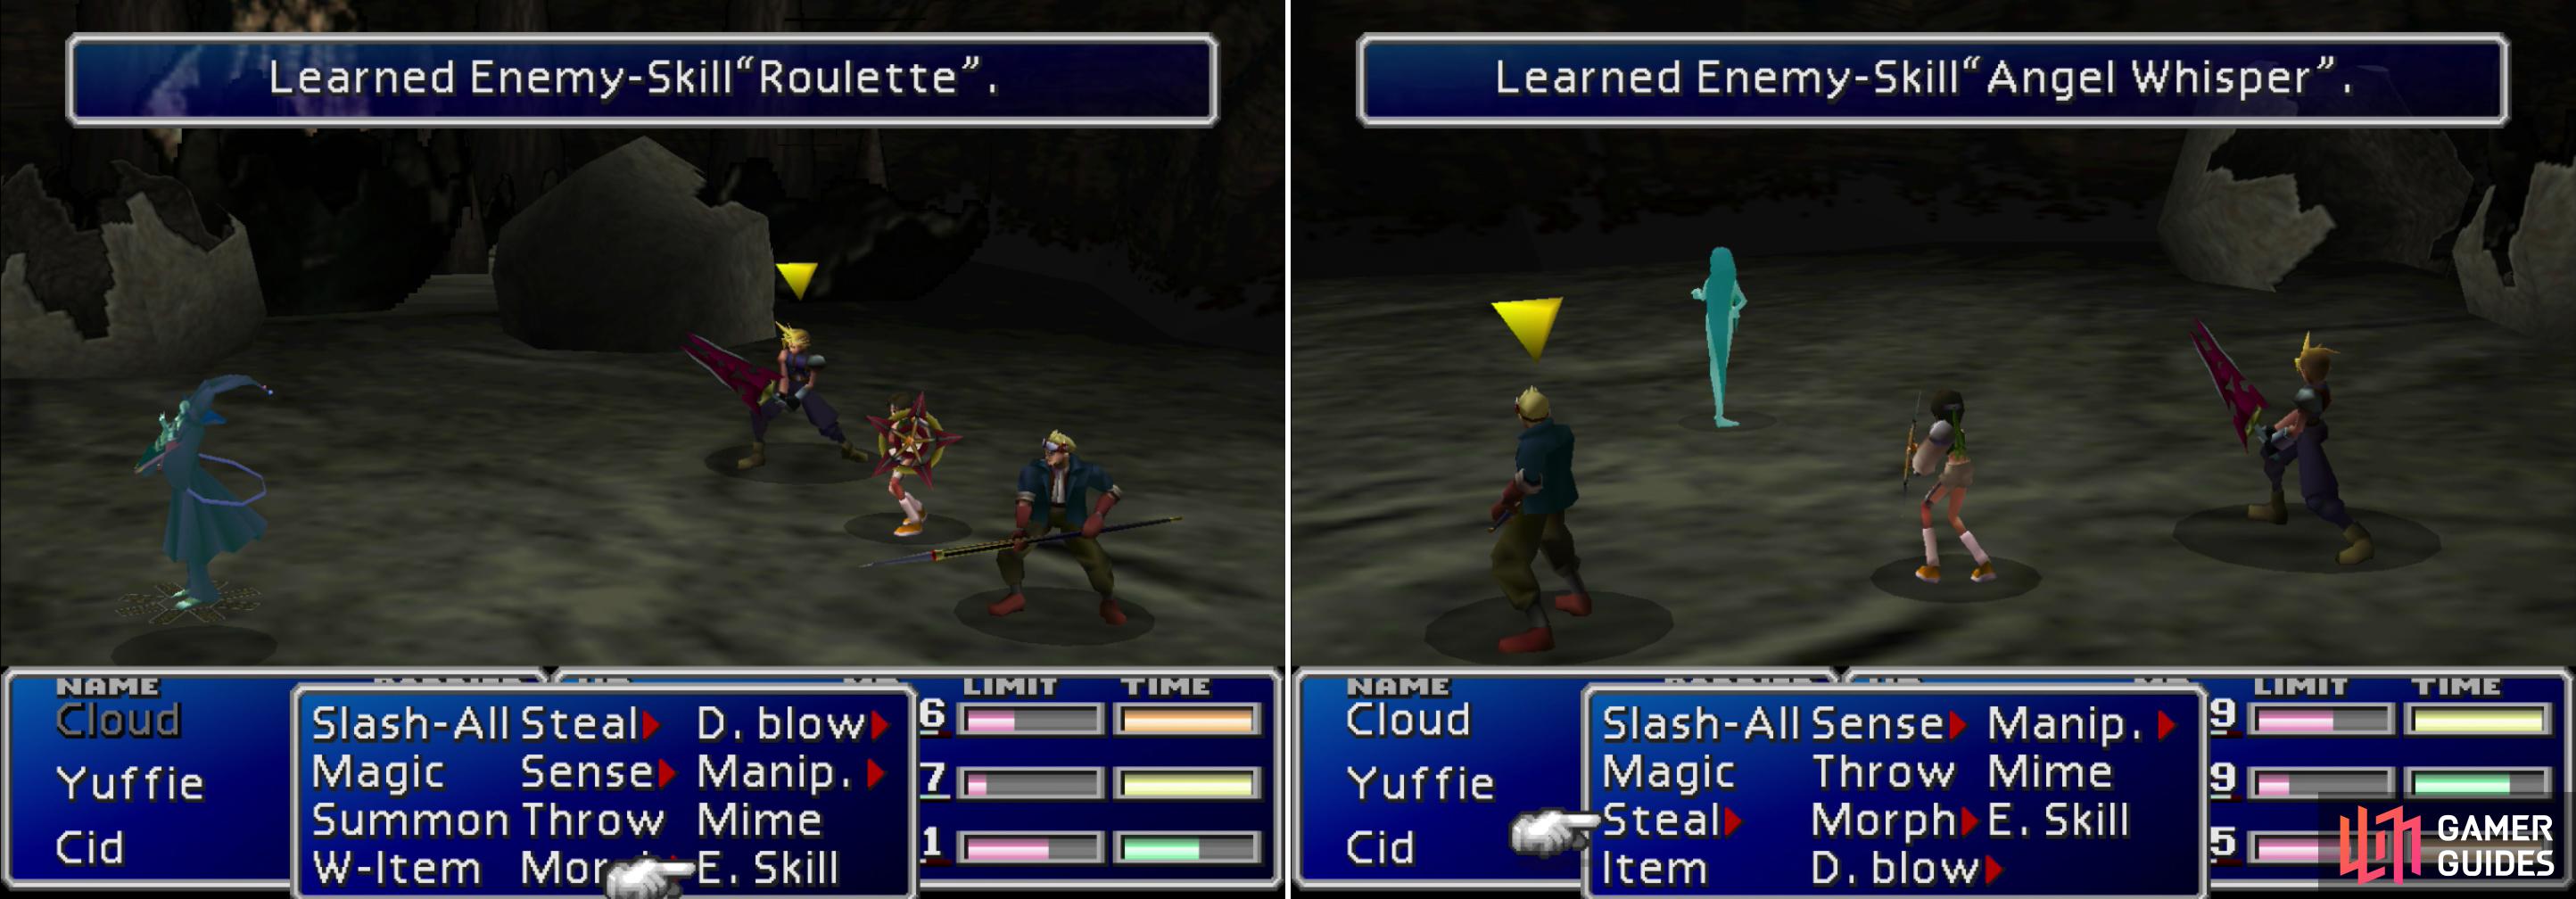 Learn the "Roulette" Enemy Skill from the Death Dealer (left) and the more useful "Angel Whisper" Enemy Skill from the Pollensalta (right).